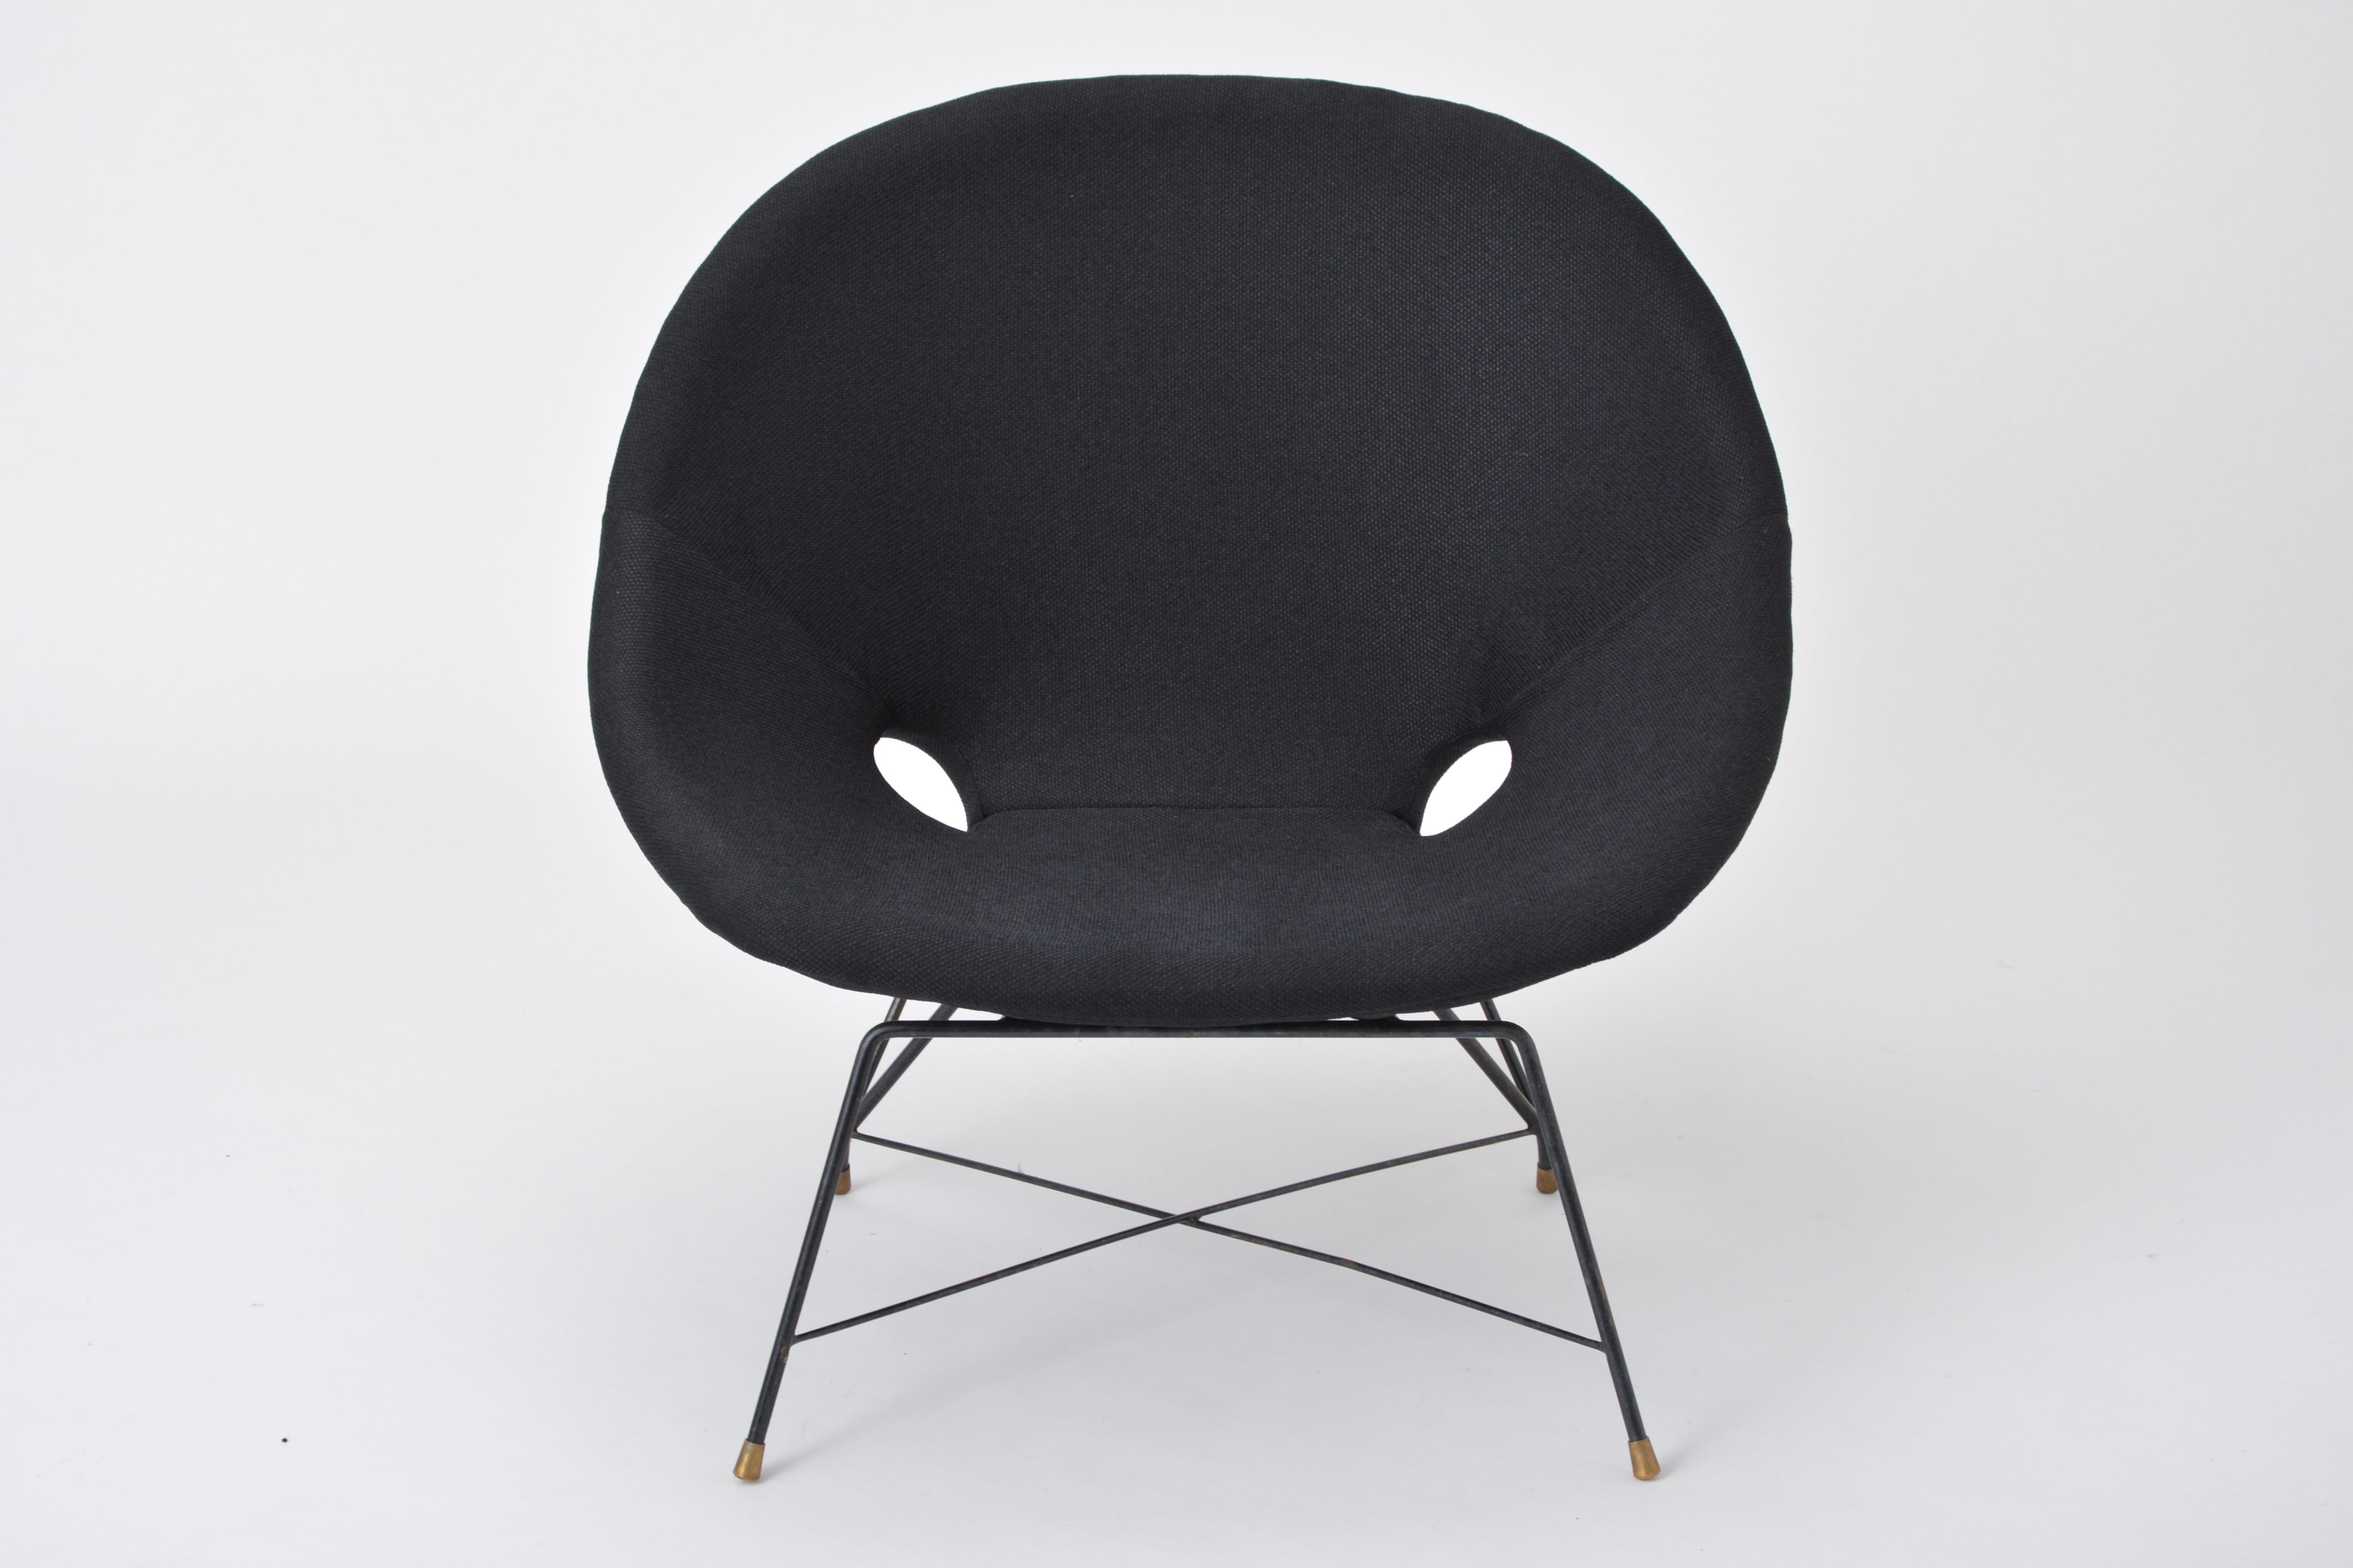 Black Italian Mid-Century Modern Cosmos chair by Augusto Bozzi for Saporiti

Rare Cosmos lounge chair designed by Augusto Bozzi for Saporiti Italia, Italy, 1954. This chair has a black lacquered metal wire frame with solid brass feet. The chair is